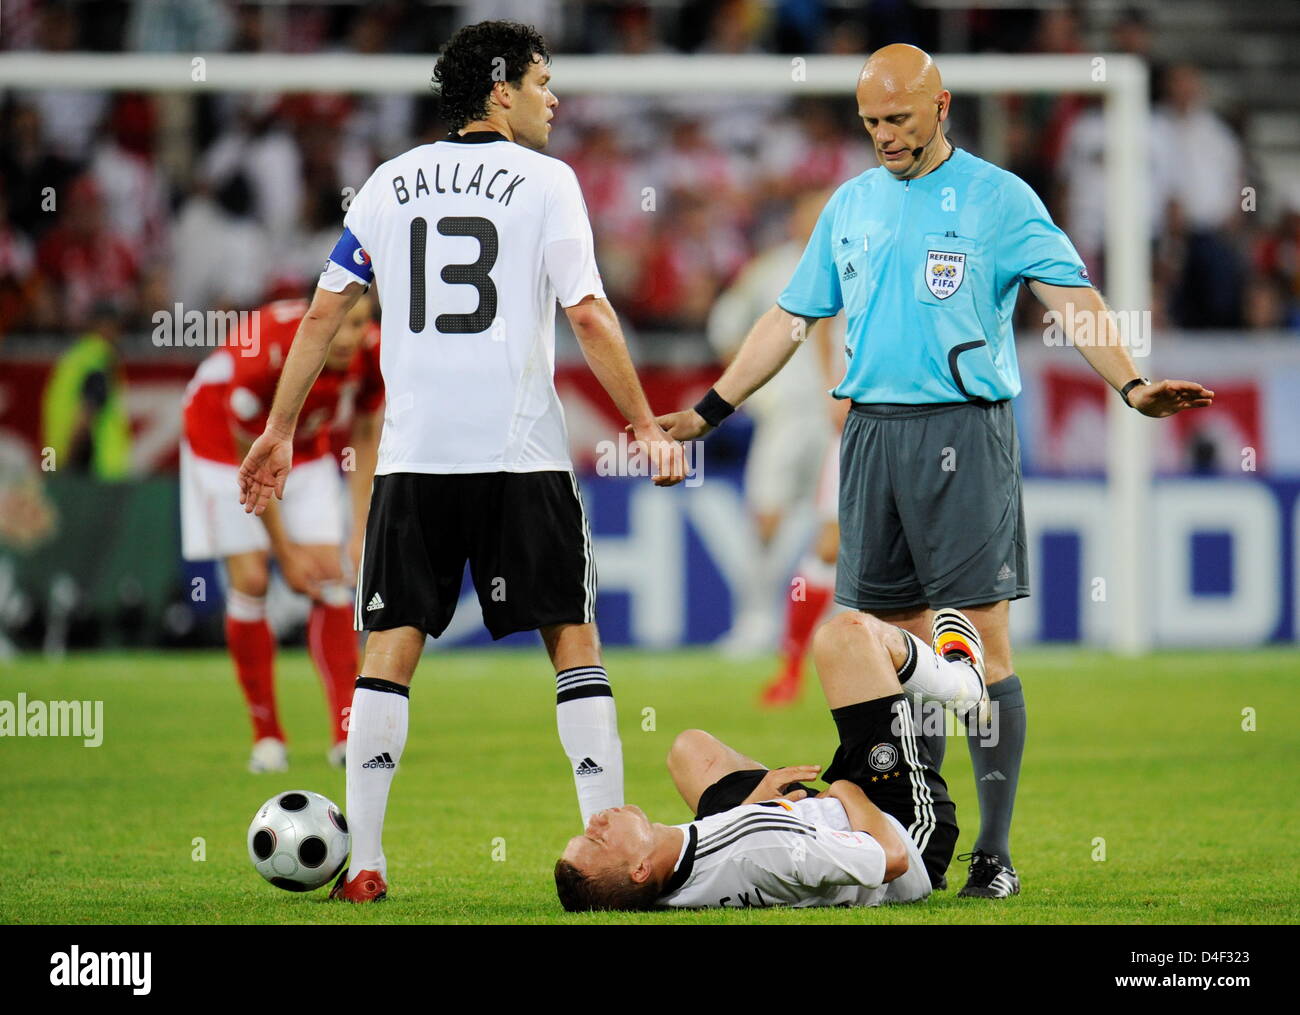 Team captain Michael Ballack (L) argues with referee Tom Henning Ovrebo after Lukas Podolski (bottom) of Germany received a kick between his legs by Dariusz Dudka (not pictured) during the EURO 2008 preliminary round group B match in Woerthersee Stadium, Klagenfurt, Austria, 08 June 2008. Photo: Peter Kneffel dpa +please note UEFA restrictions particularly in regard to slide shows  Stock Photo